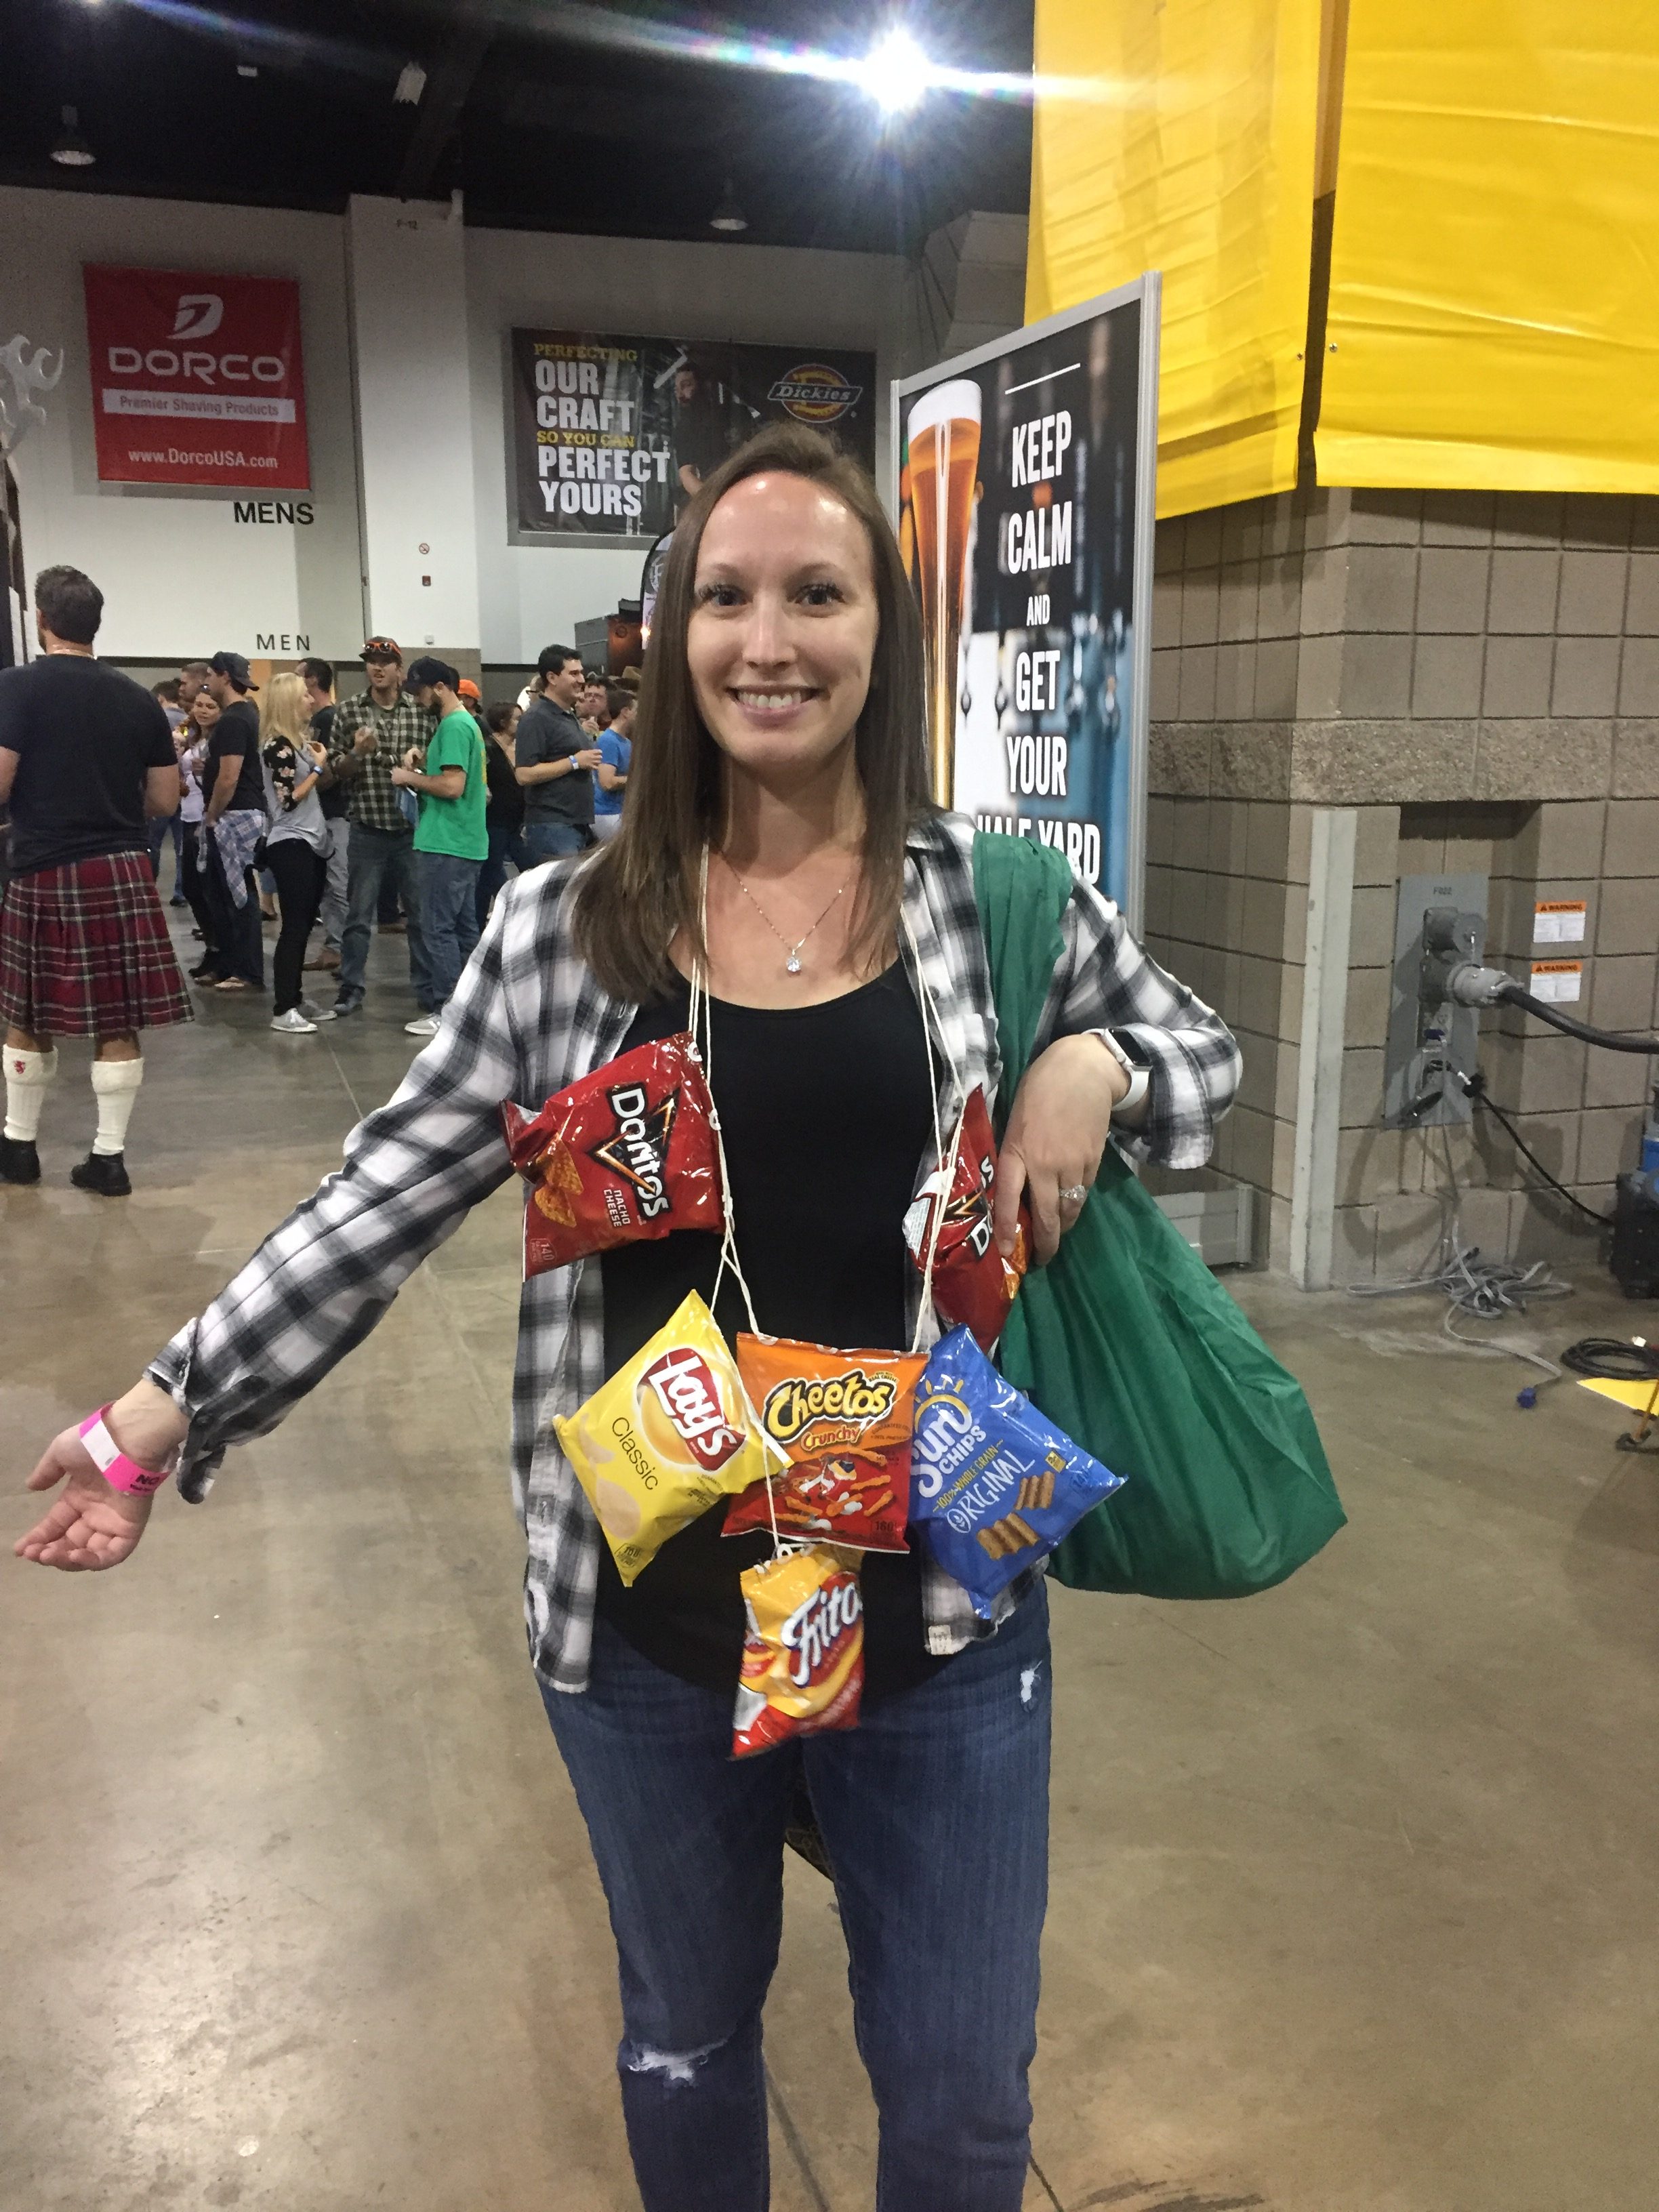 A Beginner's Guide to the Great American Beer Festival – Pubcast Worldwide